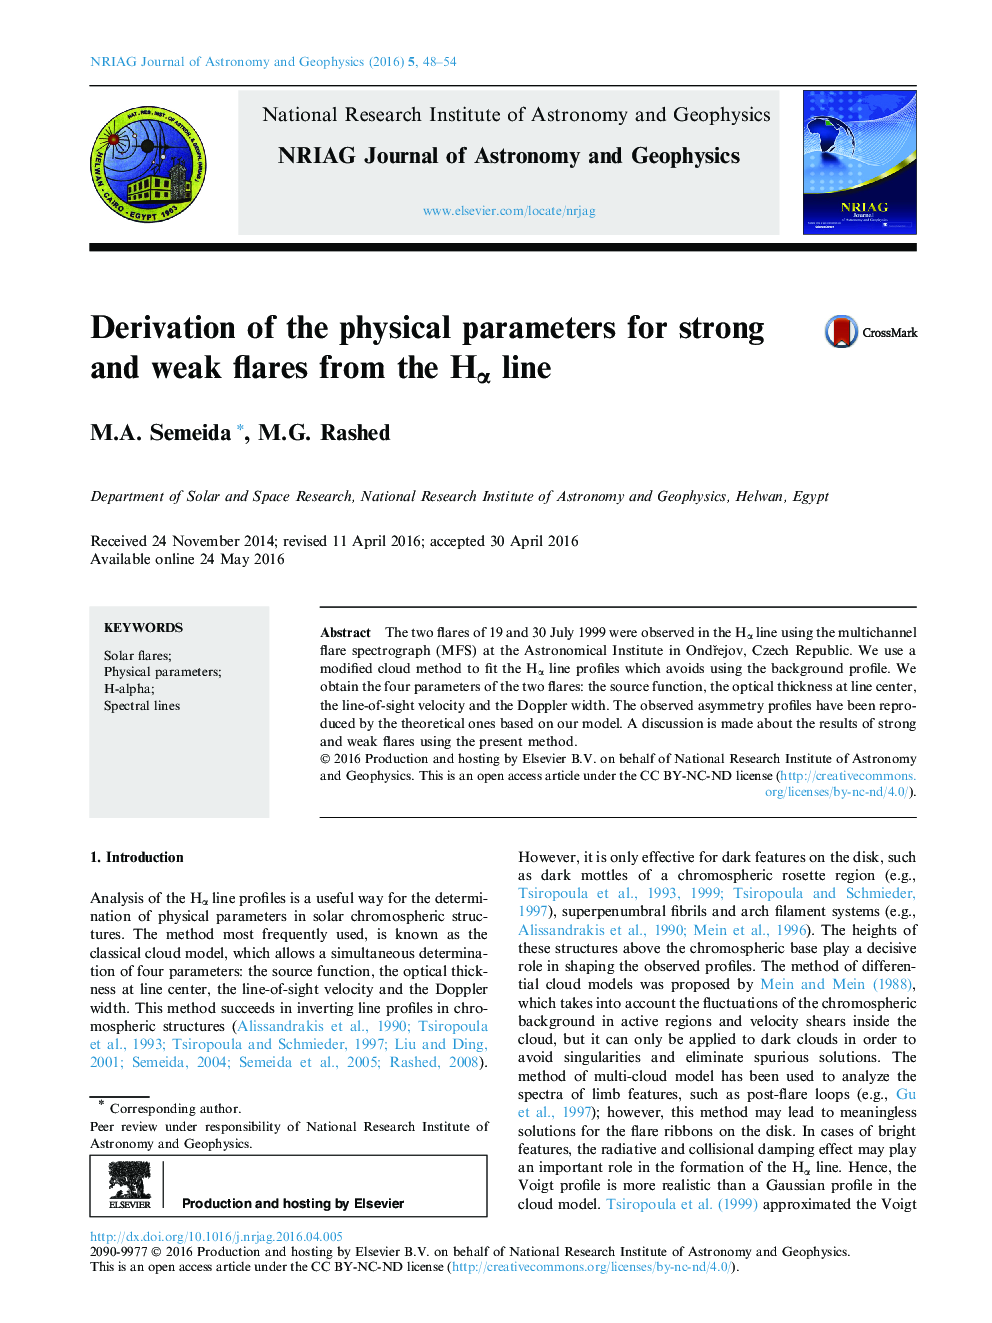 Derivation of the physical parameters for strong and weak flares from the Hα line  